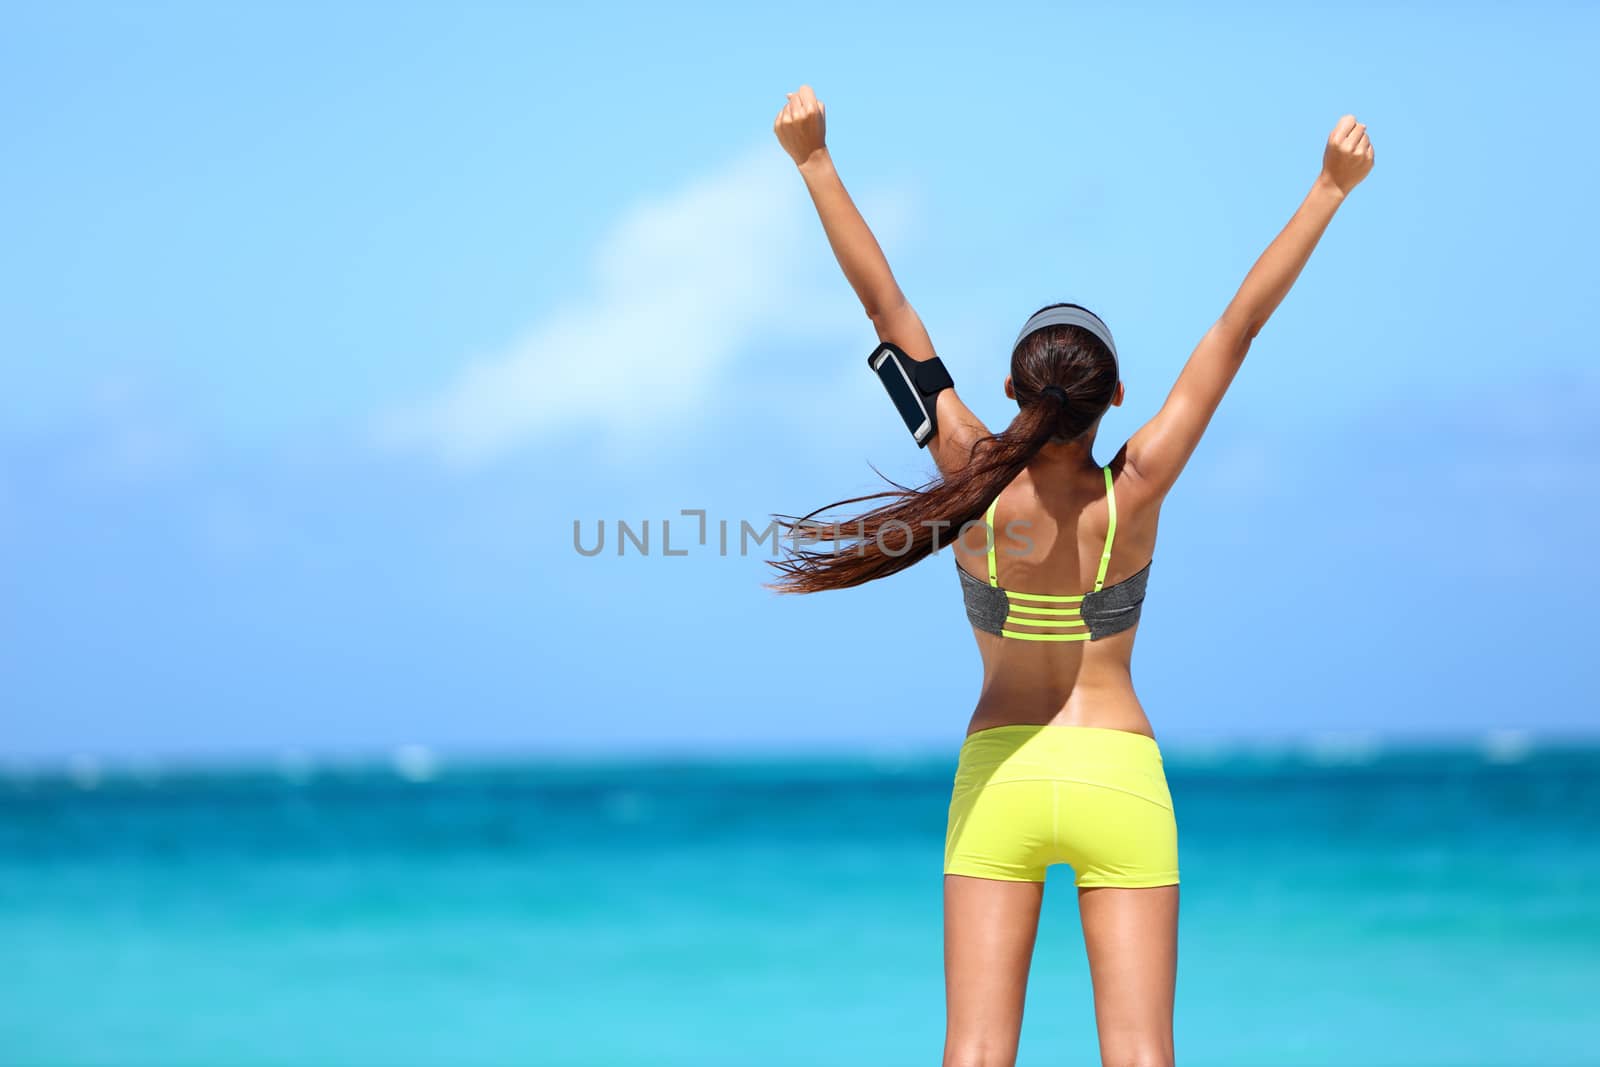 Strong fitness athlete arms up in success on summer beach after cardio training workout. Female runner woman running winning reaching goal achievement during strength training showing power.